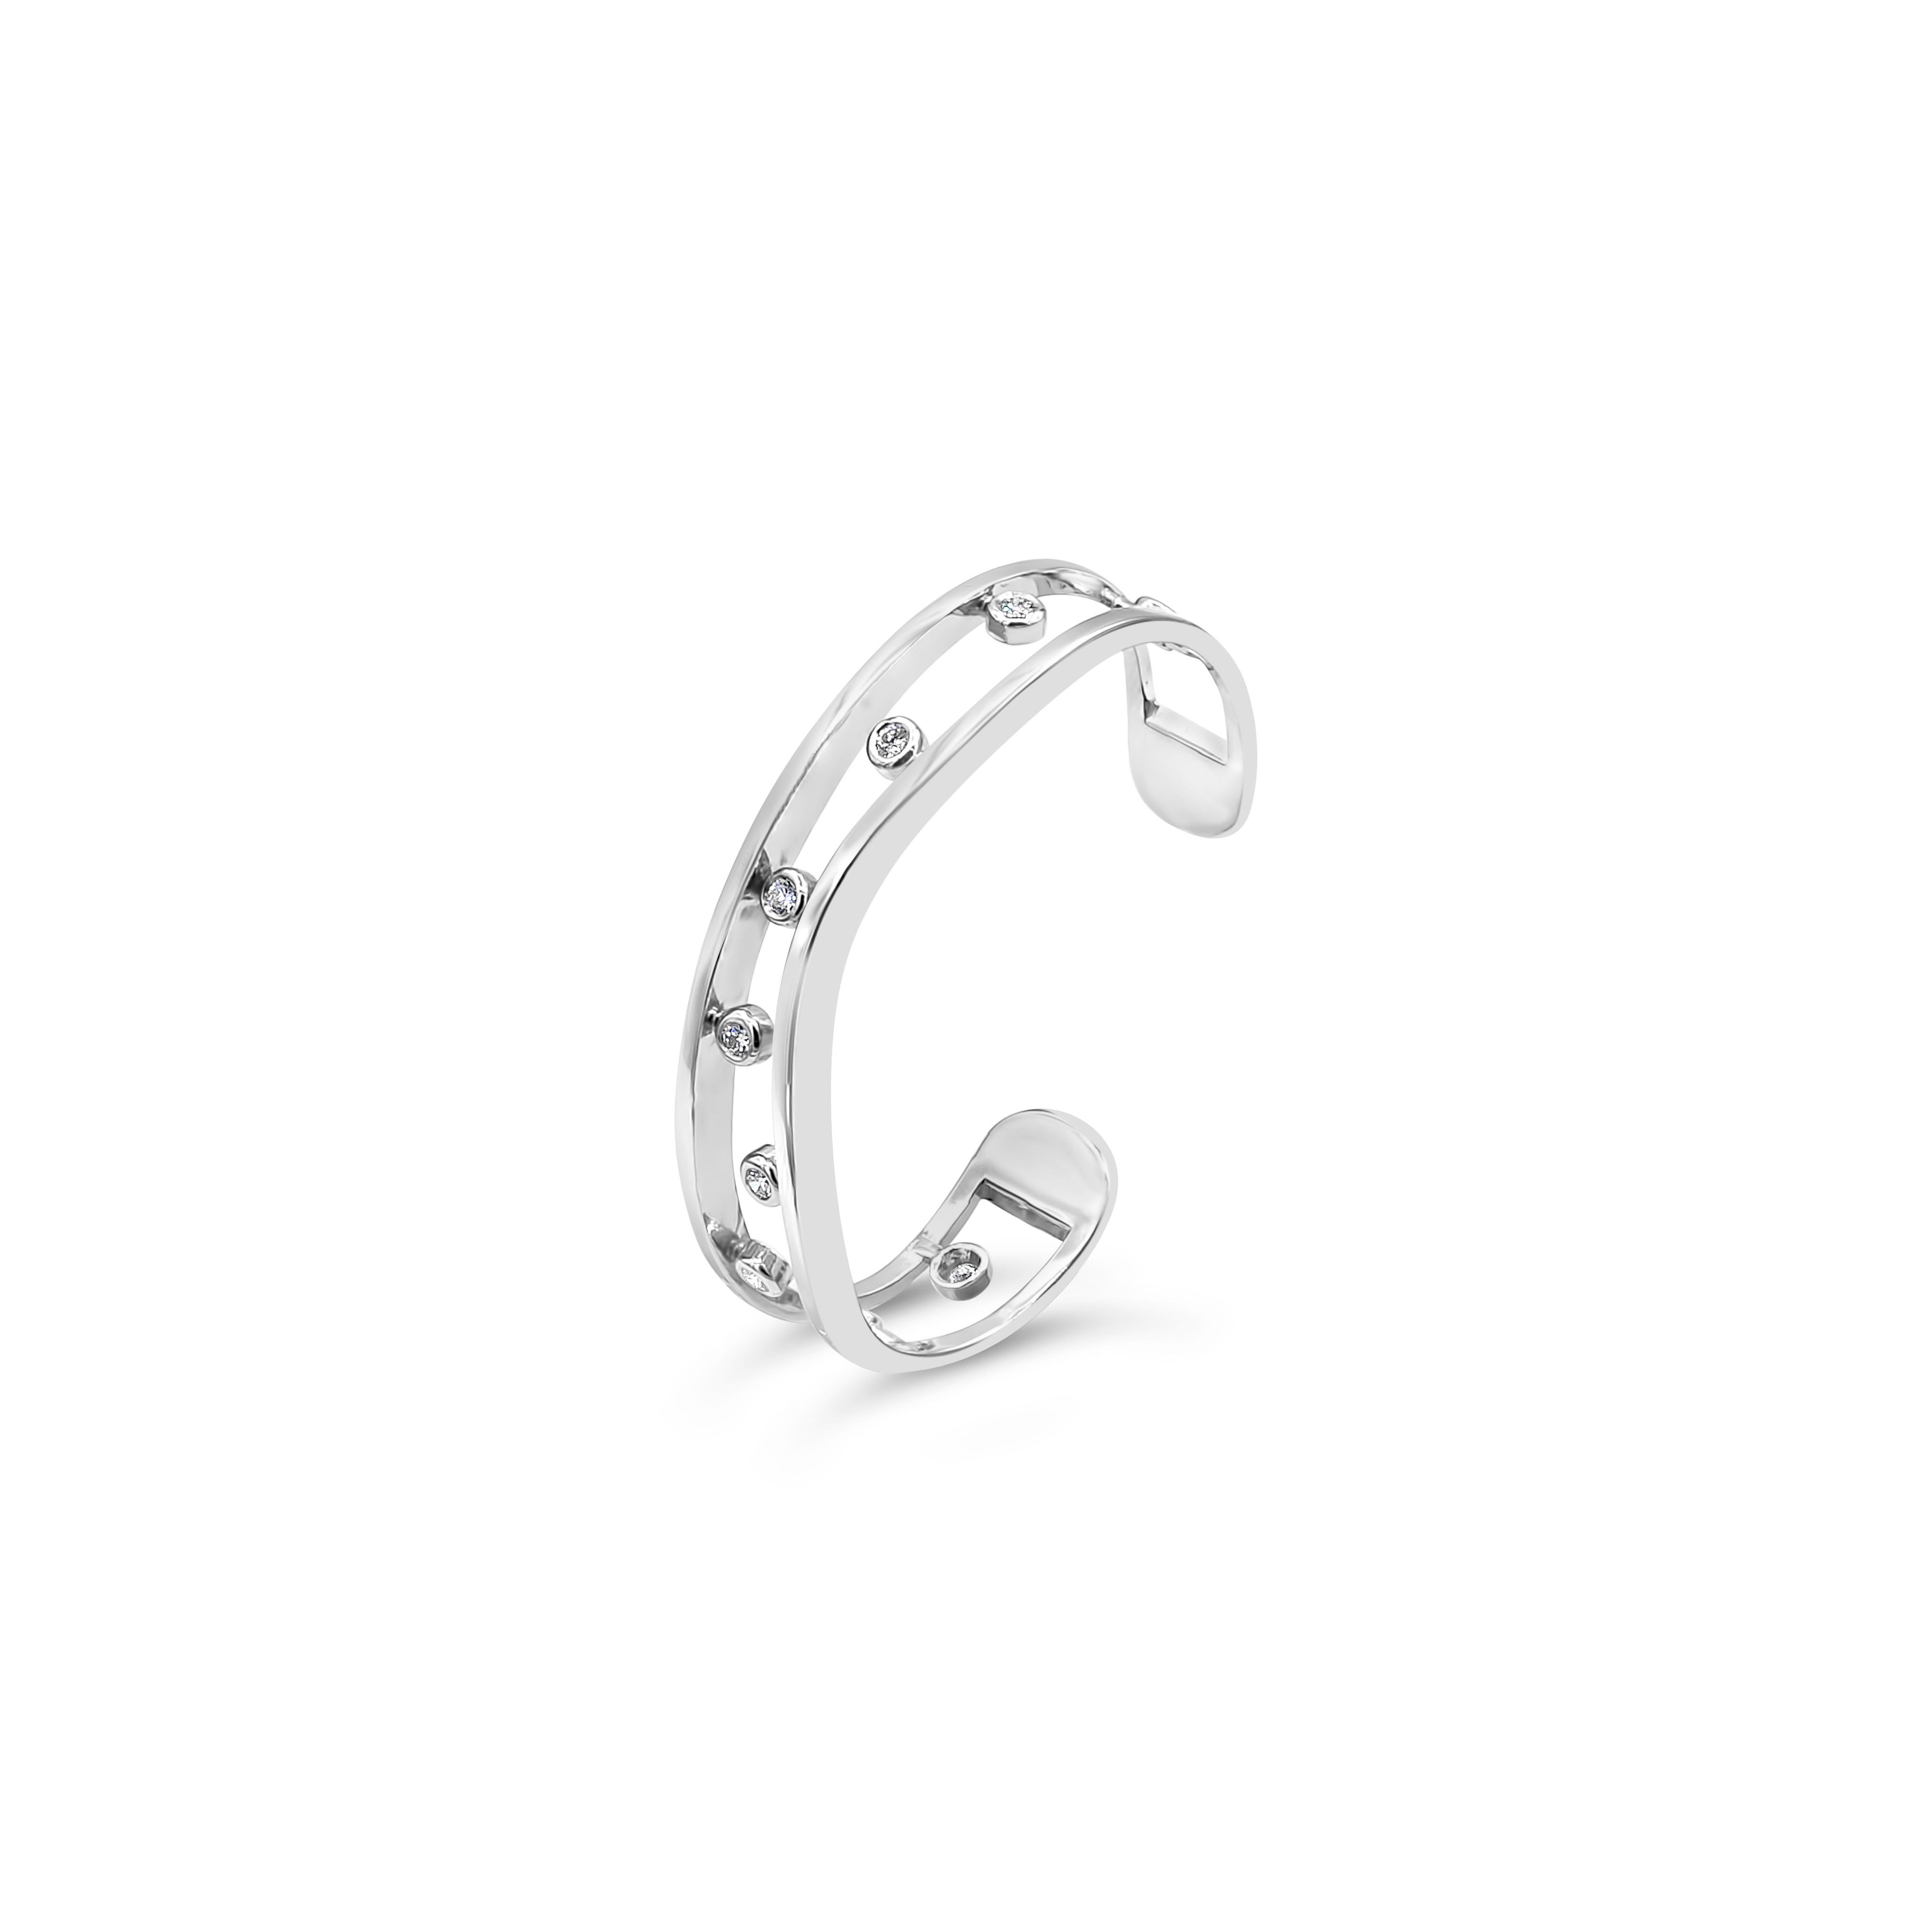 A simple piece of cuff bracelet, showcasing bezel set round diamonds of 0.65 carat total in a chic open-work design. It weighs 15.70 grams and set in 14K white gold. Small size and only fits a small wrist. 

Roman Malakov is a custom house,